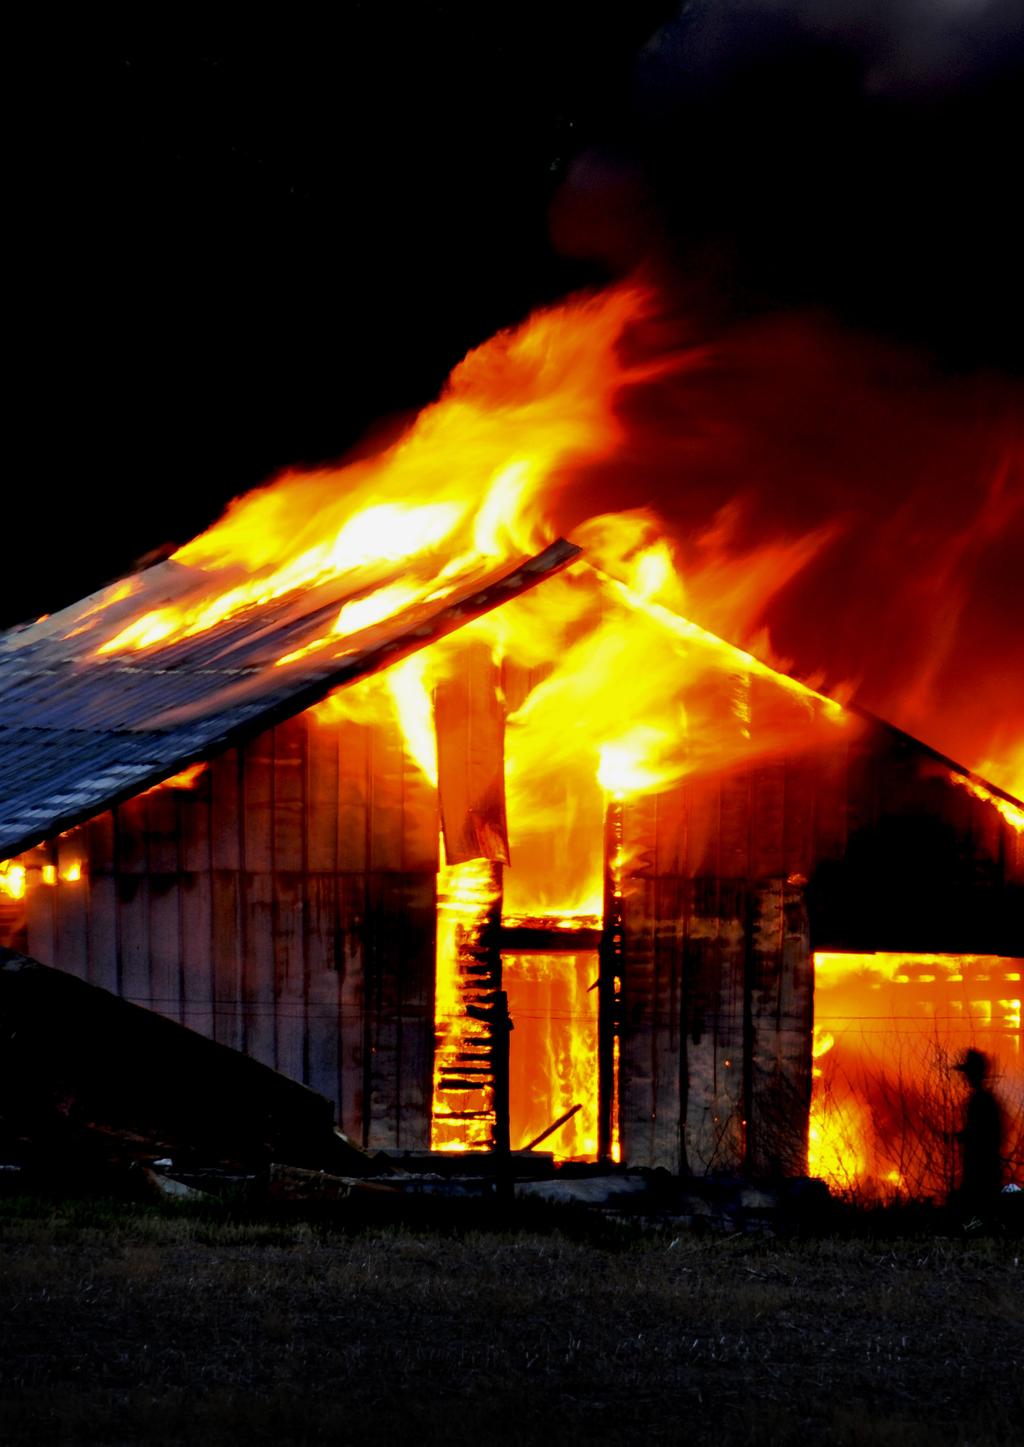 Loss of lives and damage to the environment Building fires represent approx. 40% of all fires in the world. Most fire deaths occur in private homes while people are asleep.